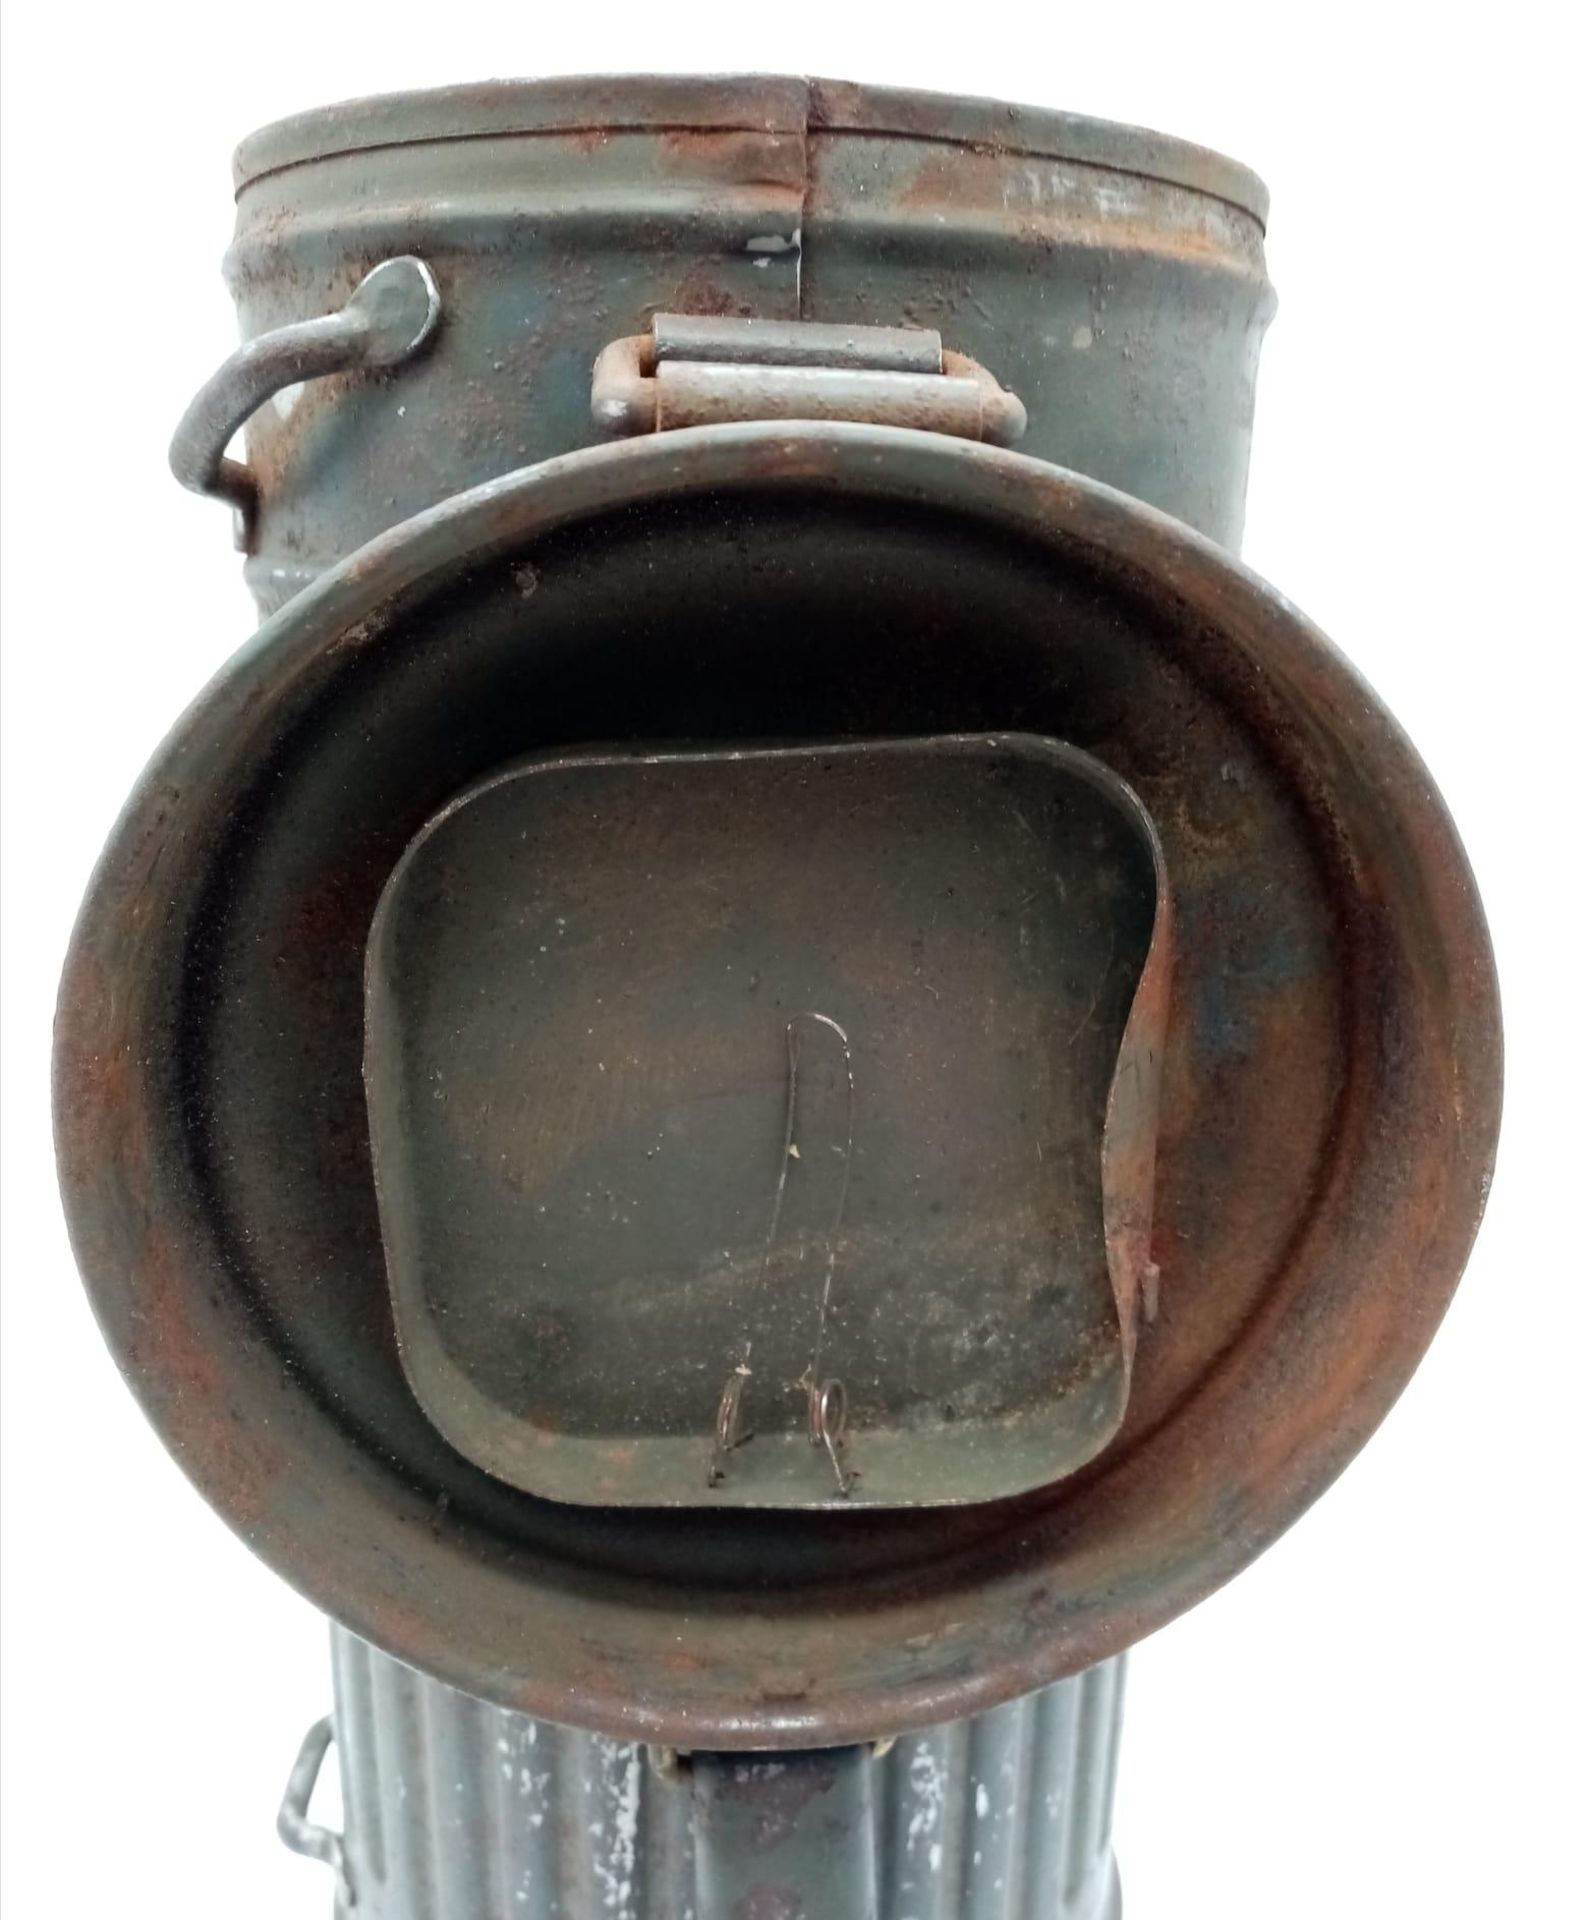 WW2 German Medics Gas Mask Canister with the soldier’s name on the bottom. Medics would often use - Image 6 of 8